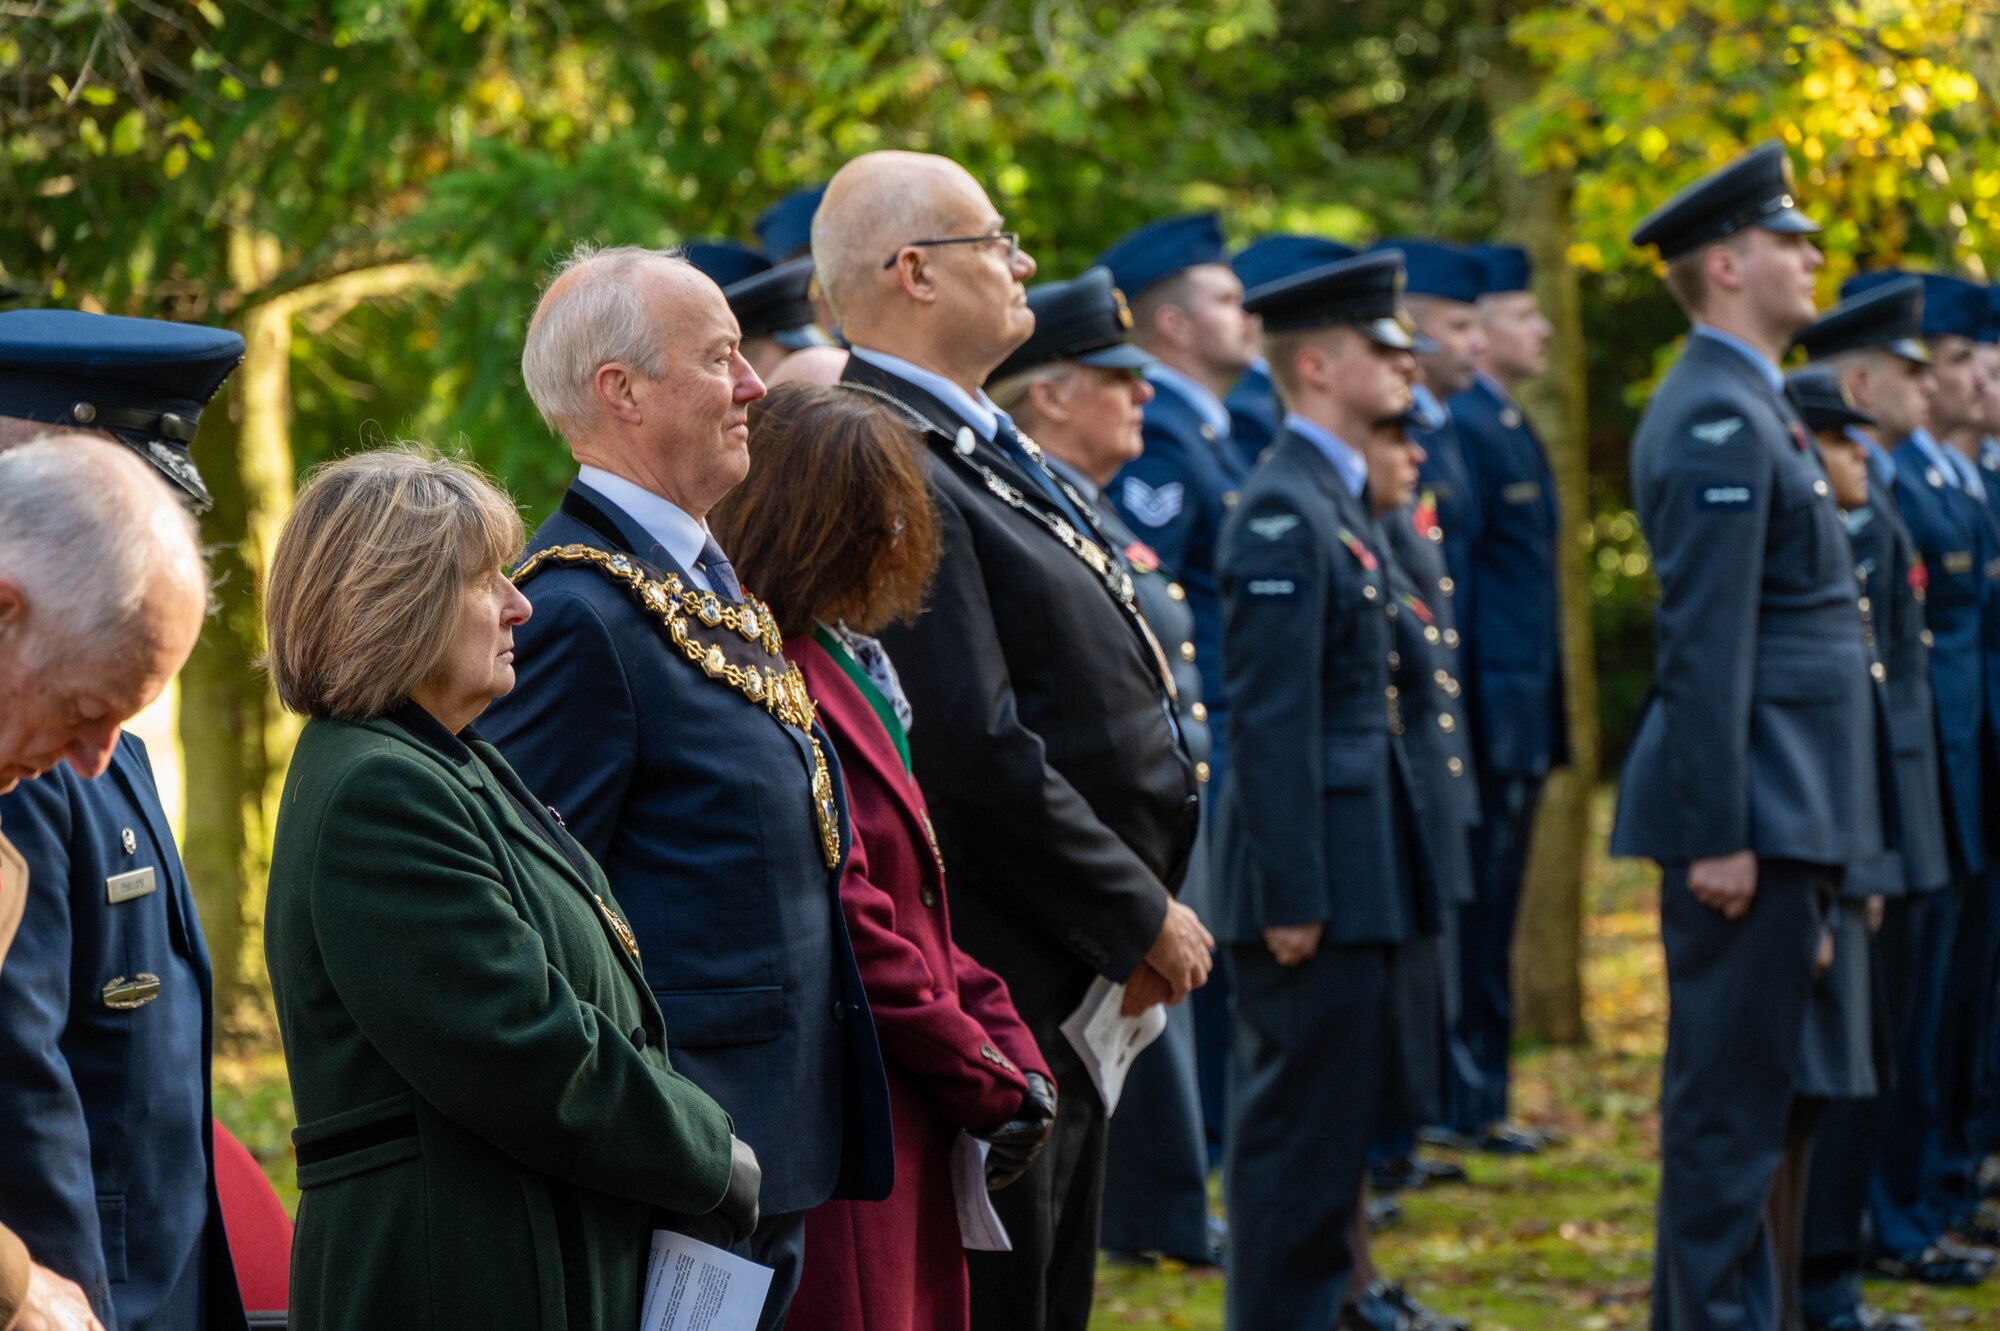 Guests stand in unity during a Remembrance Day ceremony.